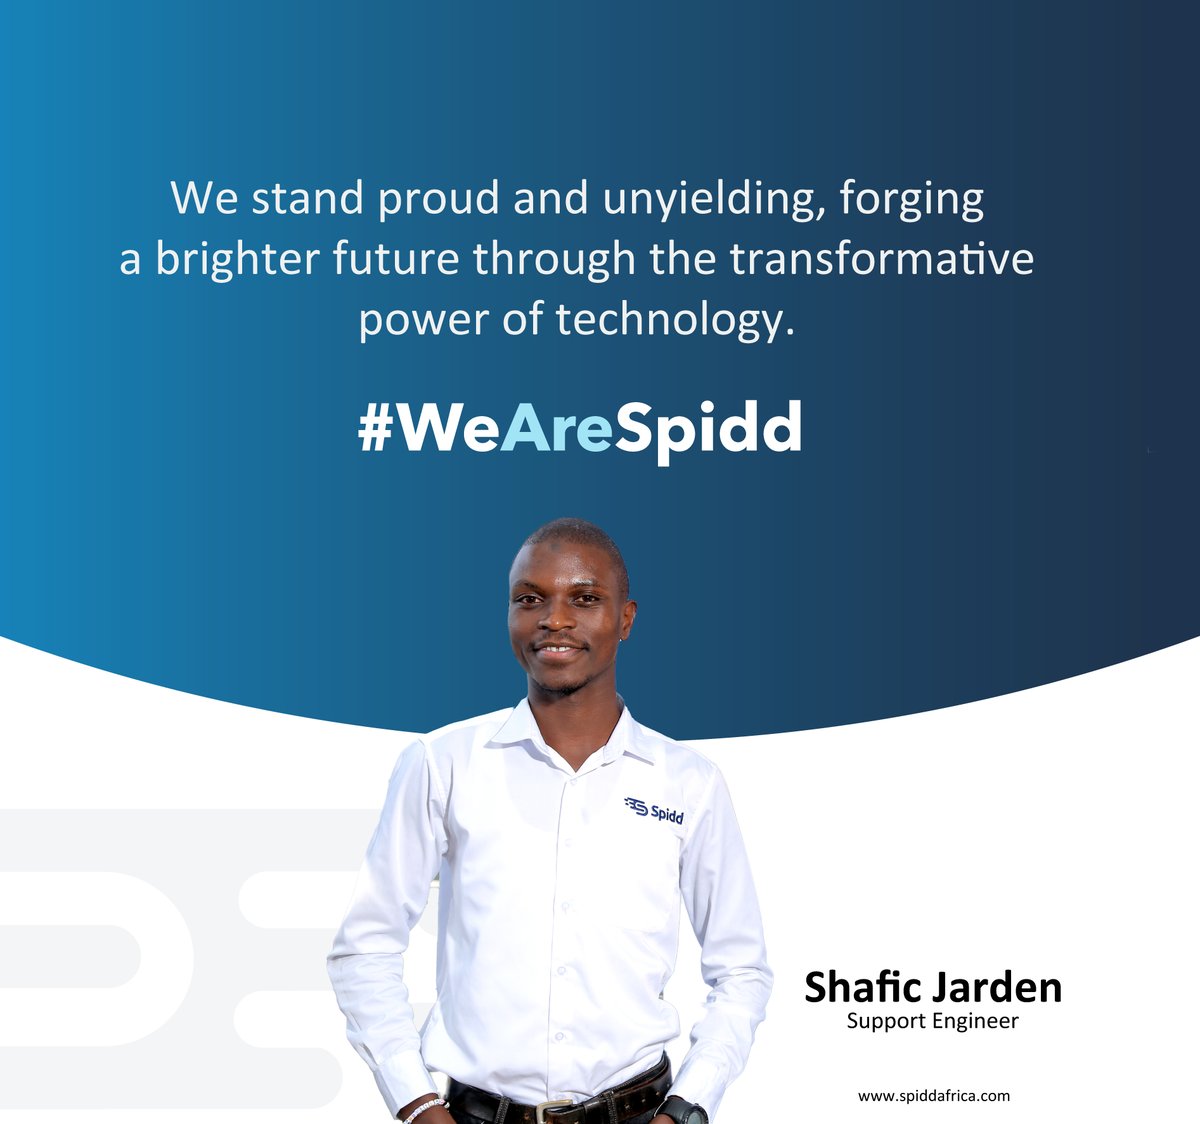 'We stand proud and unyielding, forging a brighter future through the transformative power of technology' - SHAFIC JARDEN,  Support Engineer  #WeAreSpidd

Start a Journey with Spidd Africa, visit: spiddafrica.com or Call: 041 4251138 #itmanagedservices  #itservices